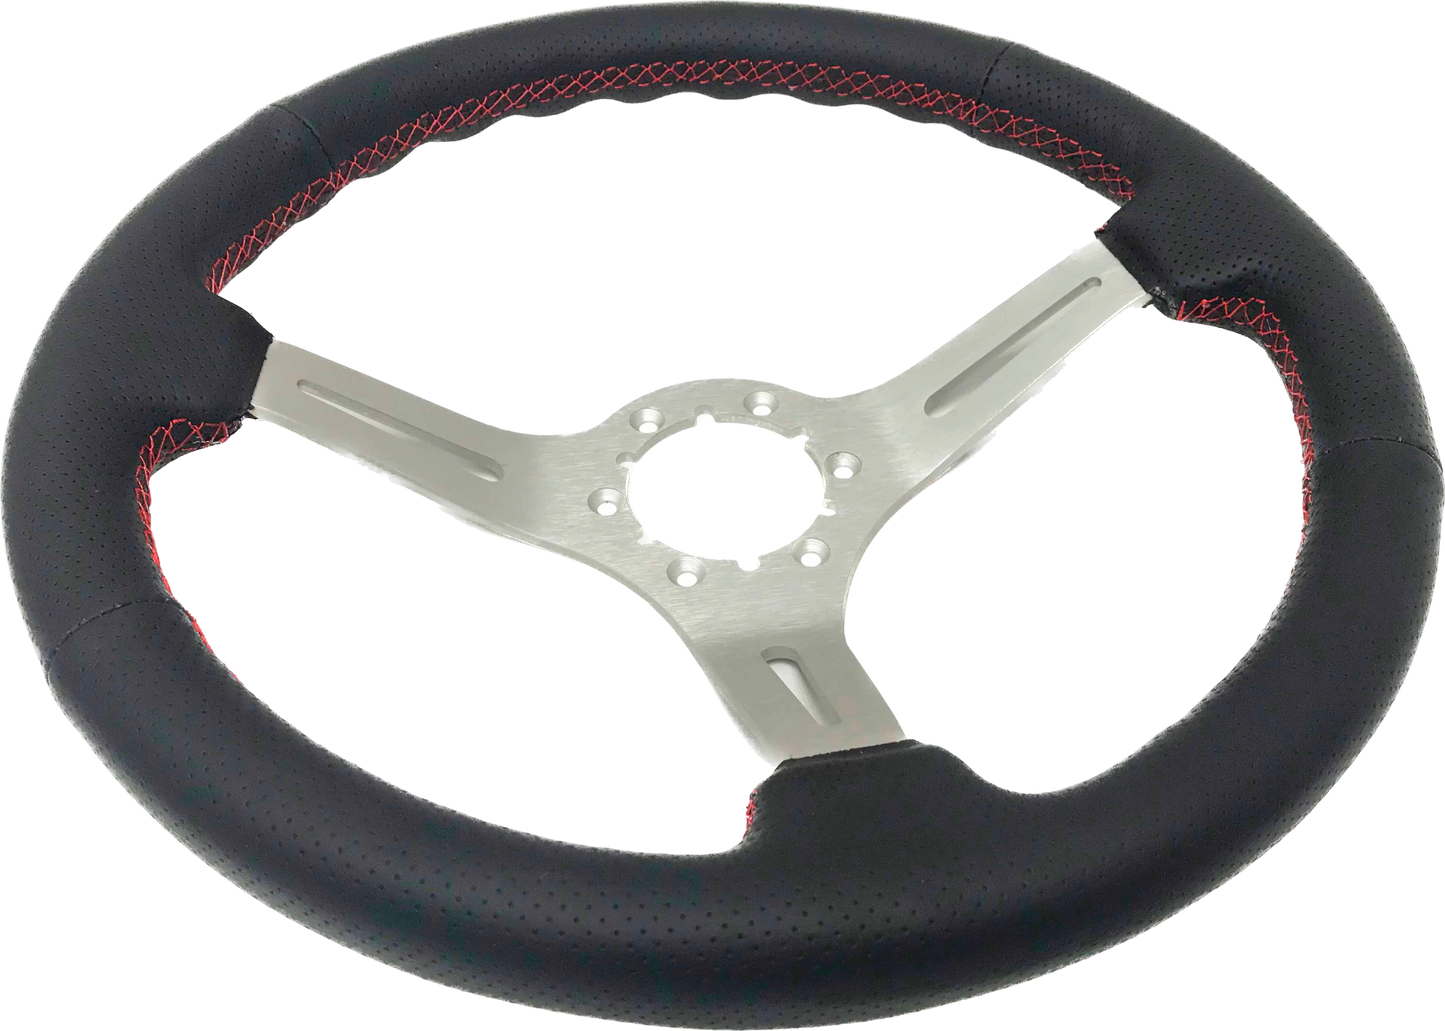 1967-69 Ford Galaxie Steering Wheel Kit | Perforated Leather | ST3587BLK-RED